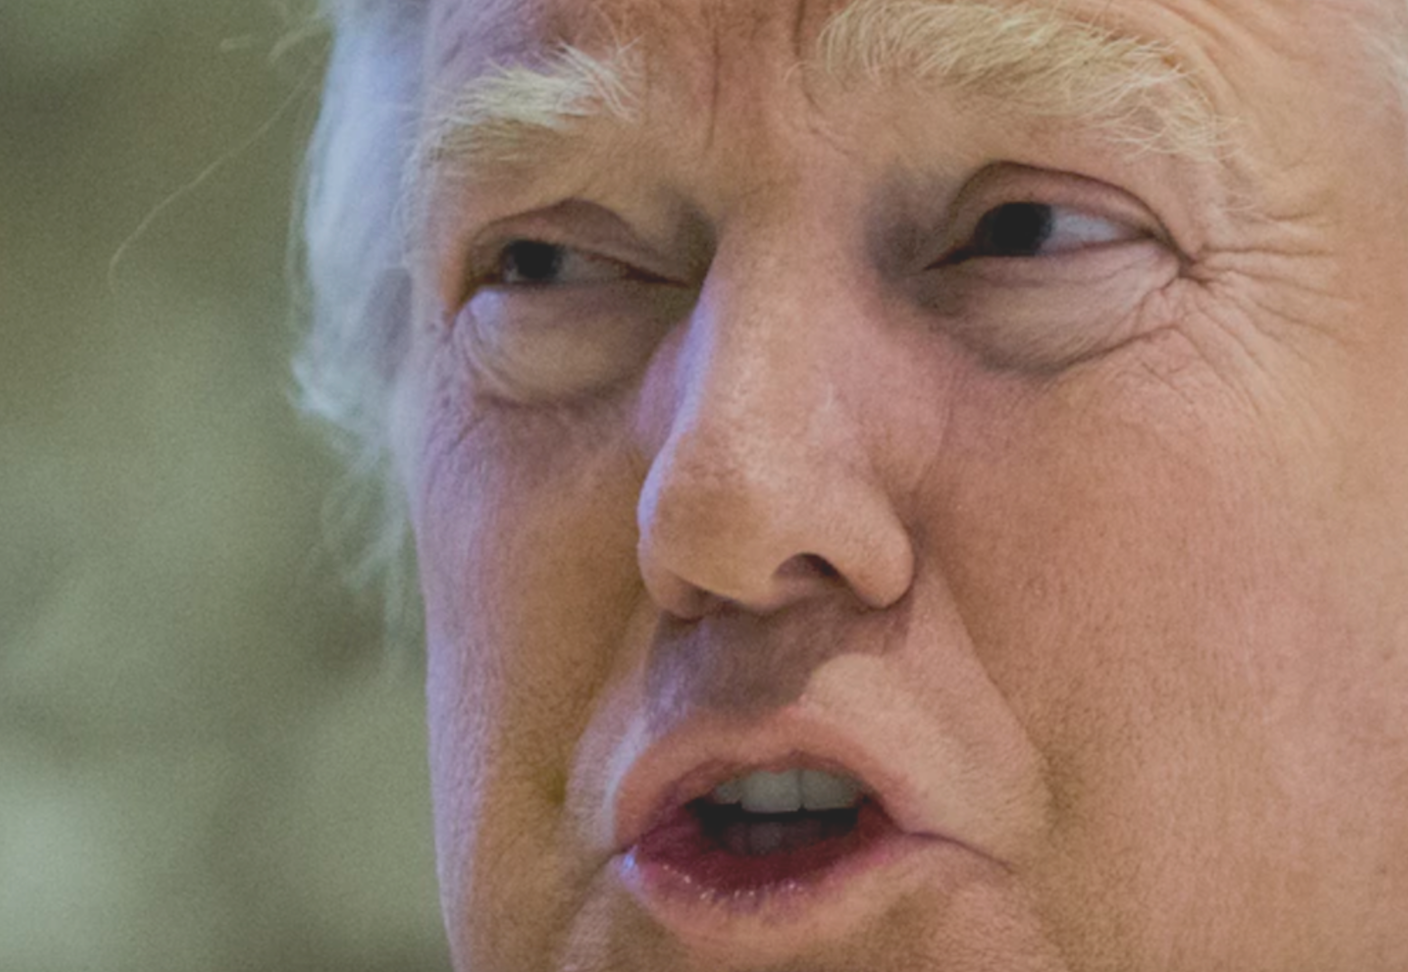 Body Language and Medical Analysis №4221: Why are Donald Trump’s Pupils ...1408 x 972